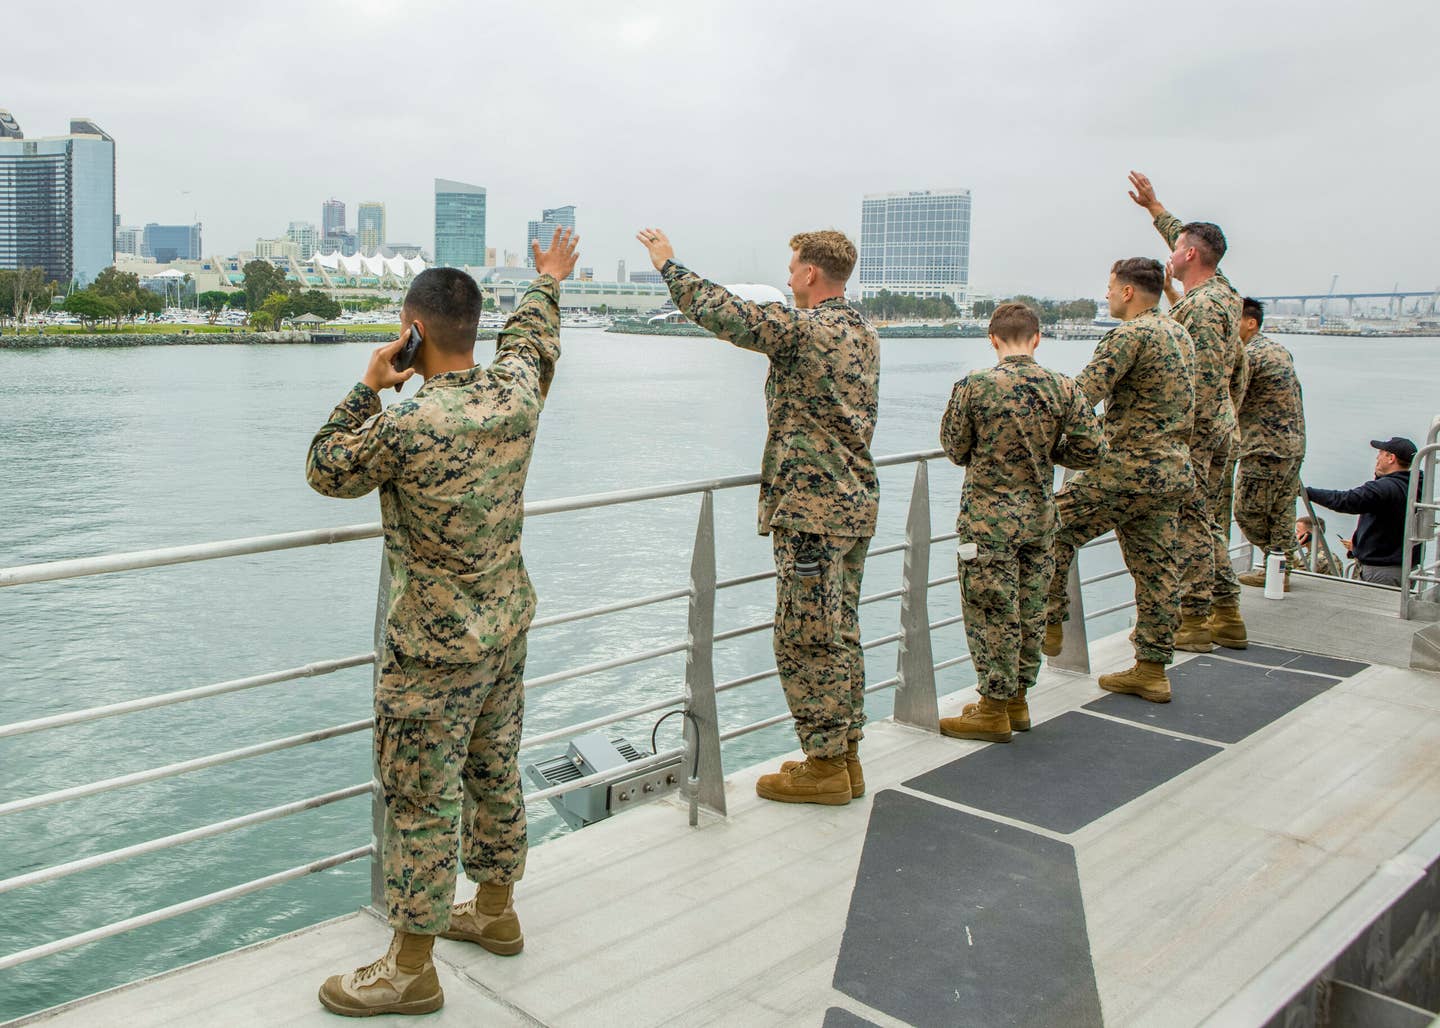 U.S. Marines and Sailors with Task Force Koa Moana (TF KM) 20, I Marine Expeditionary Force, wave from a distance to their friends and family as they depart San Diego, July 2020. (U.S. Marine Corps photo by Cpl. Anabel Abreu Rodriguez)